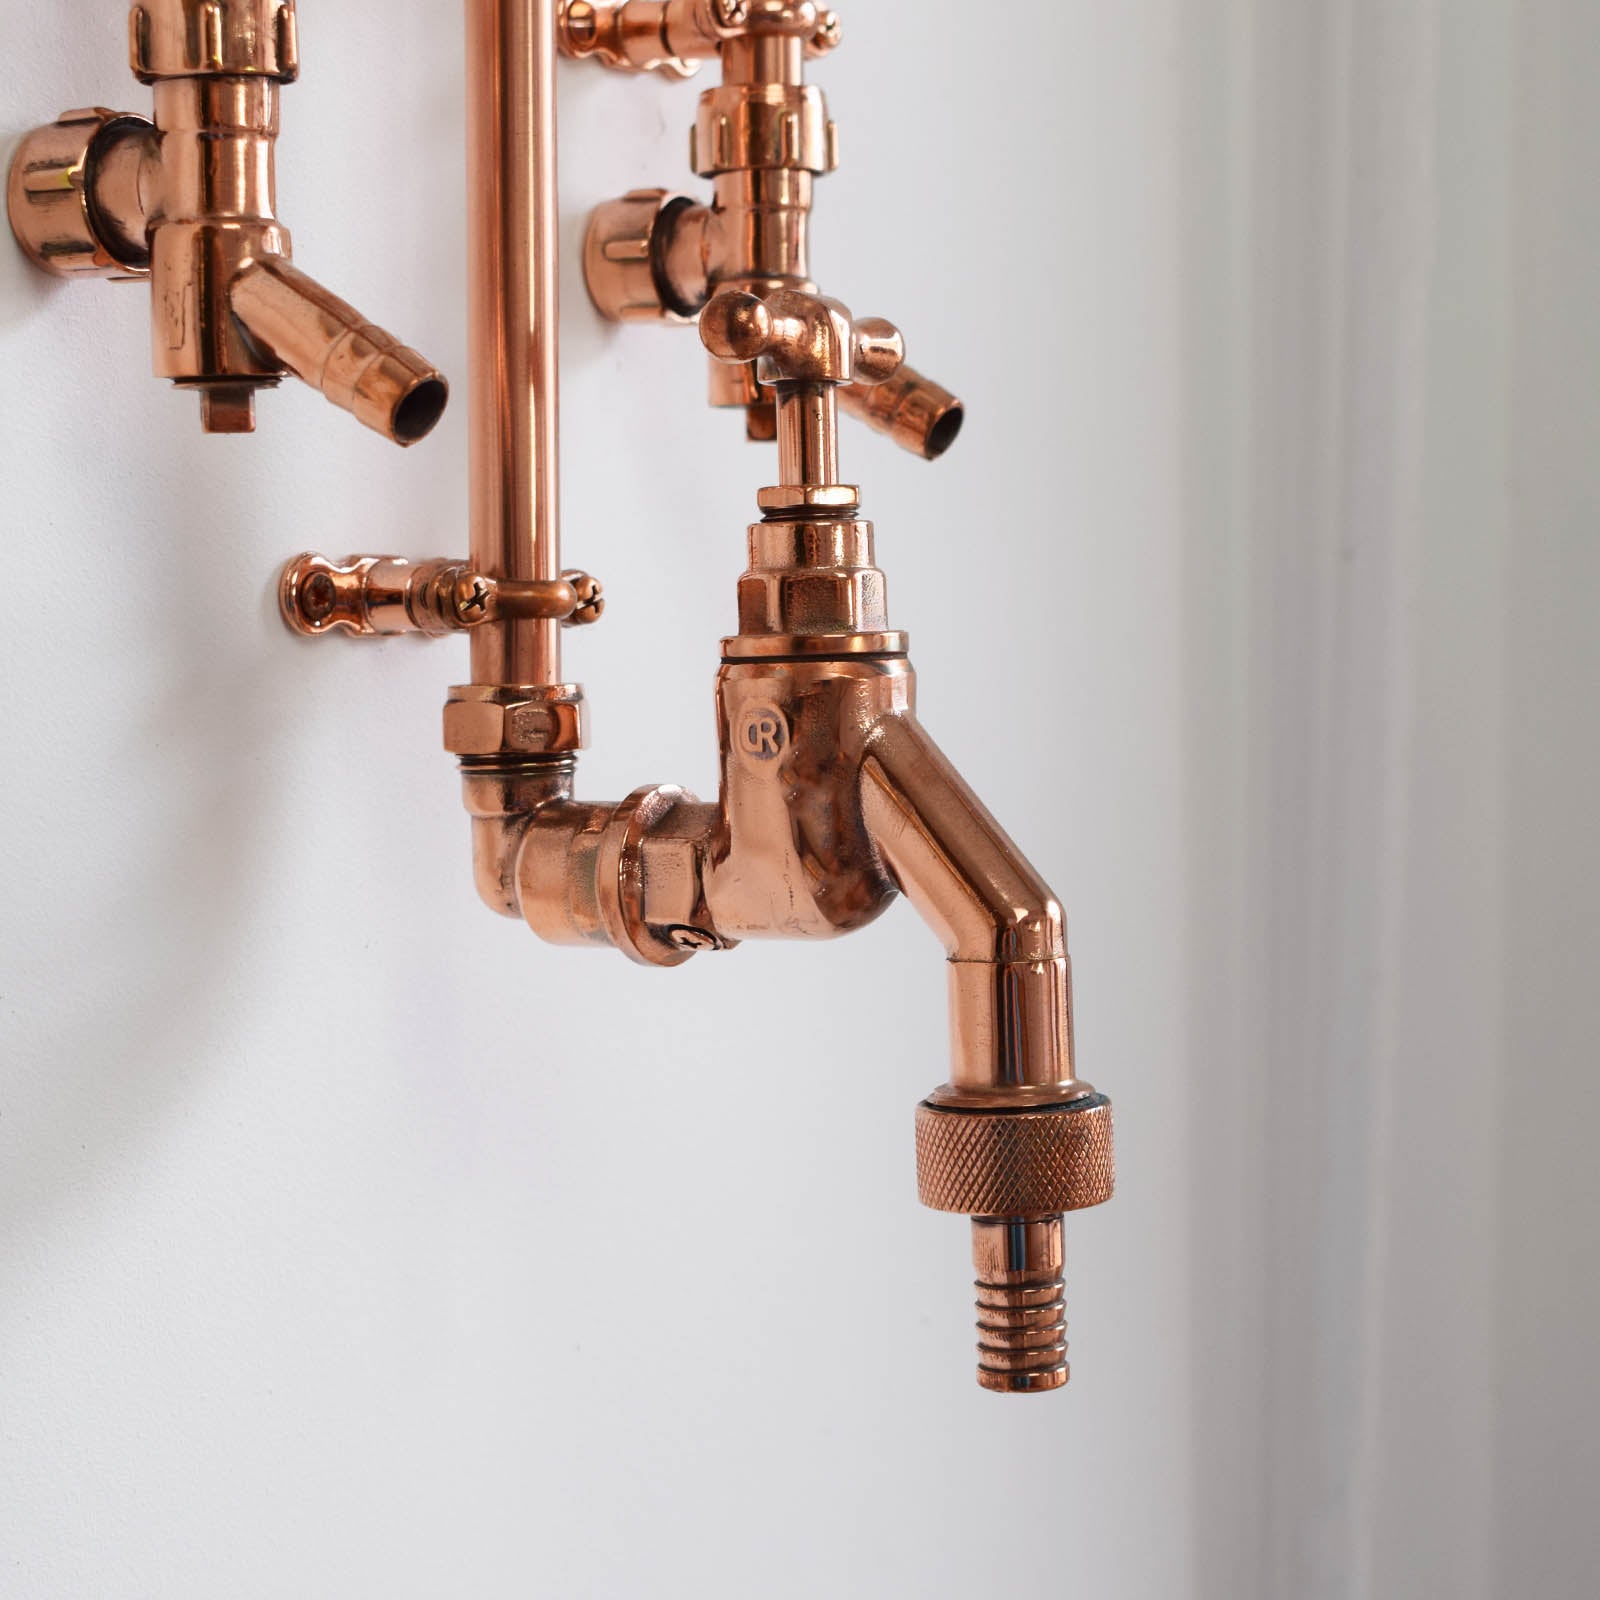 Garden tap in a copper finish, garden shower kits now available